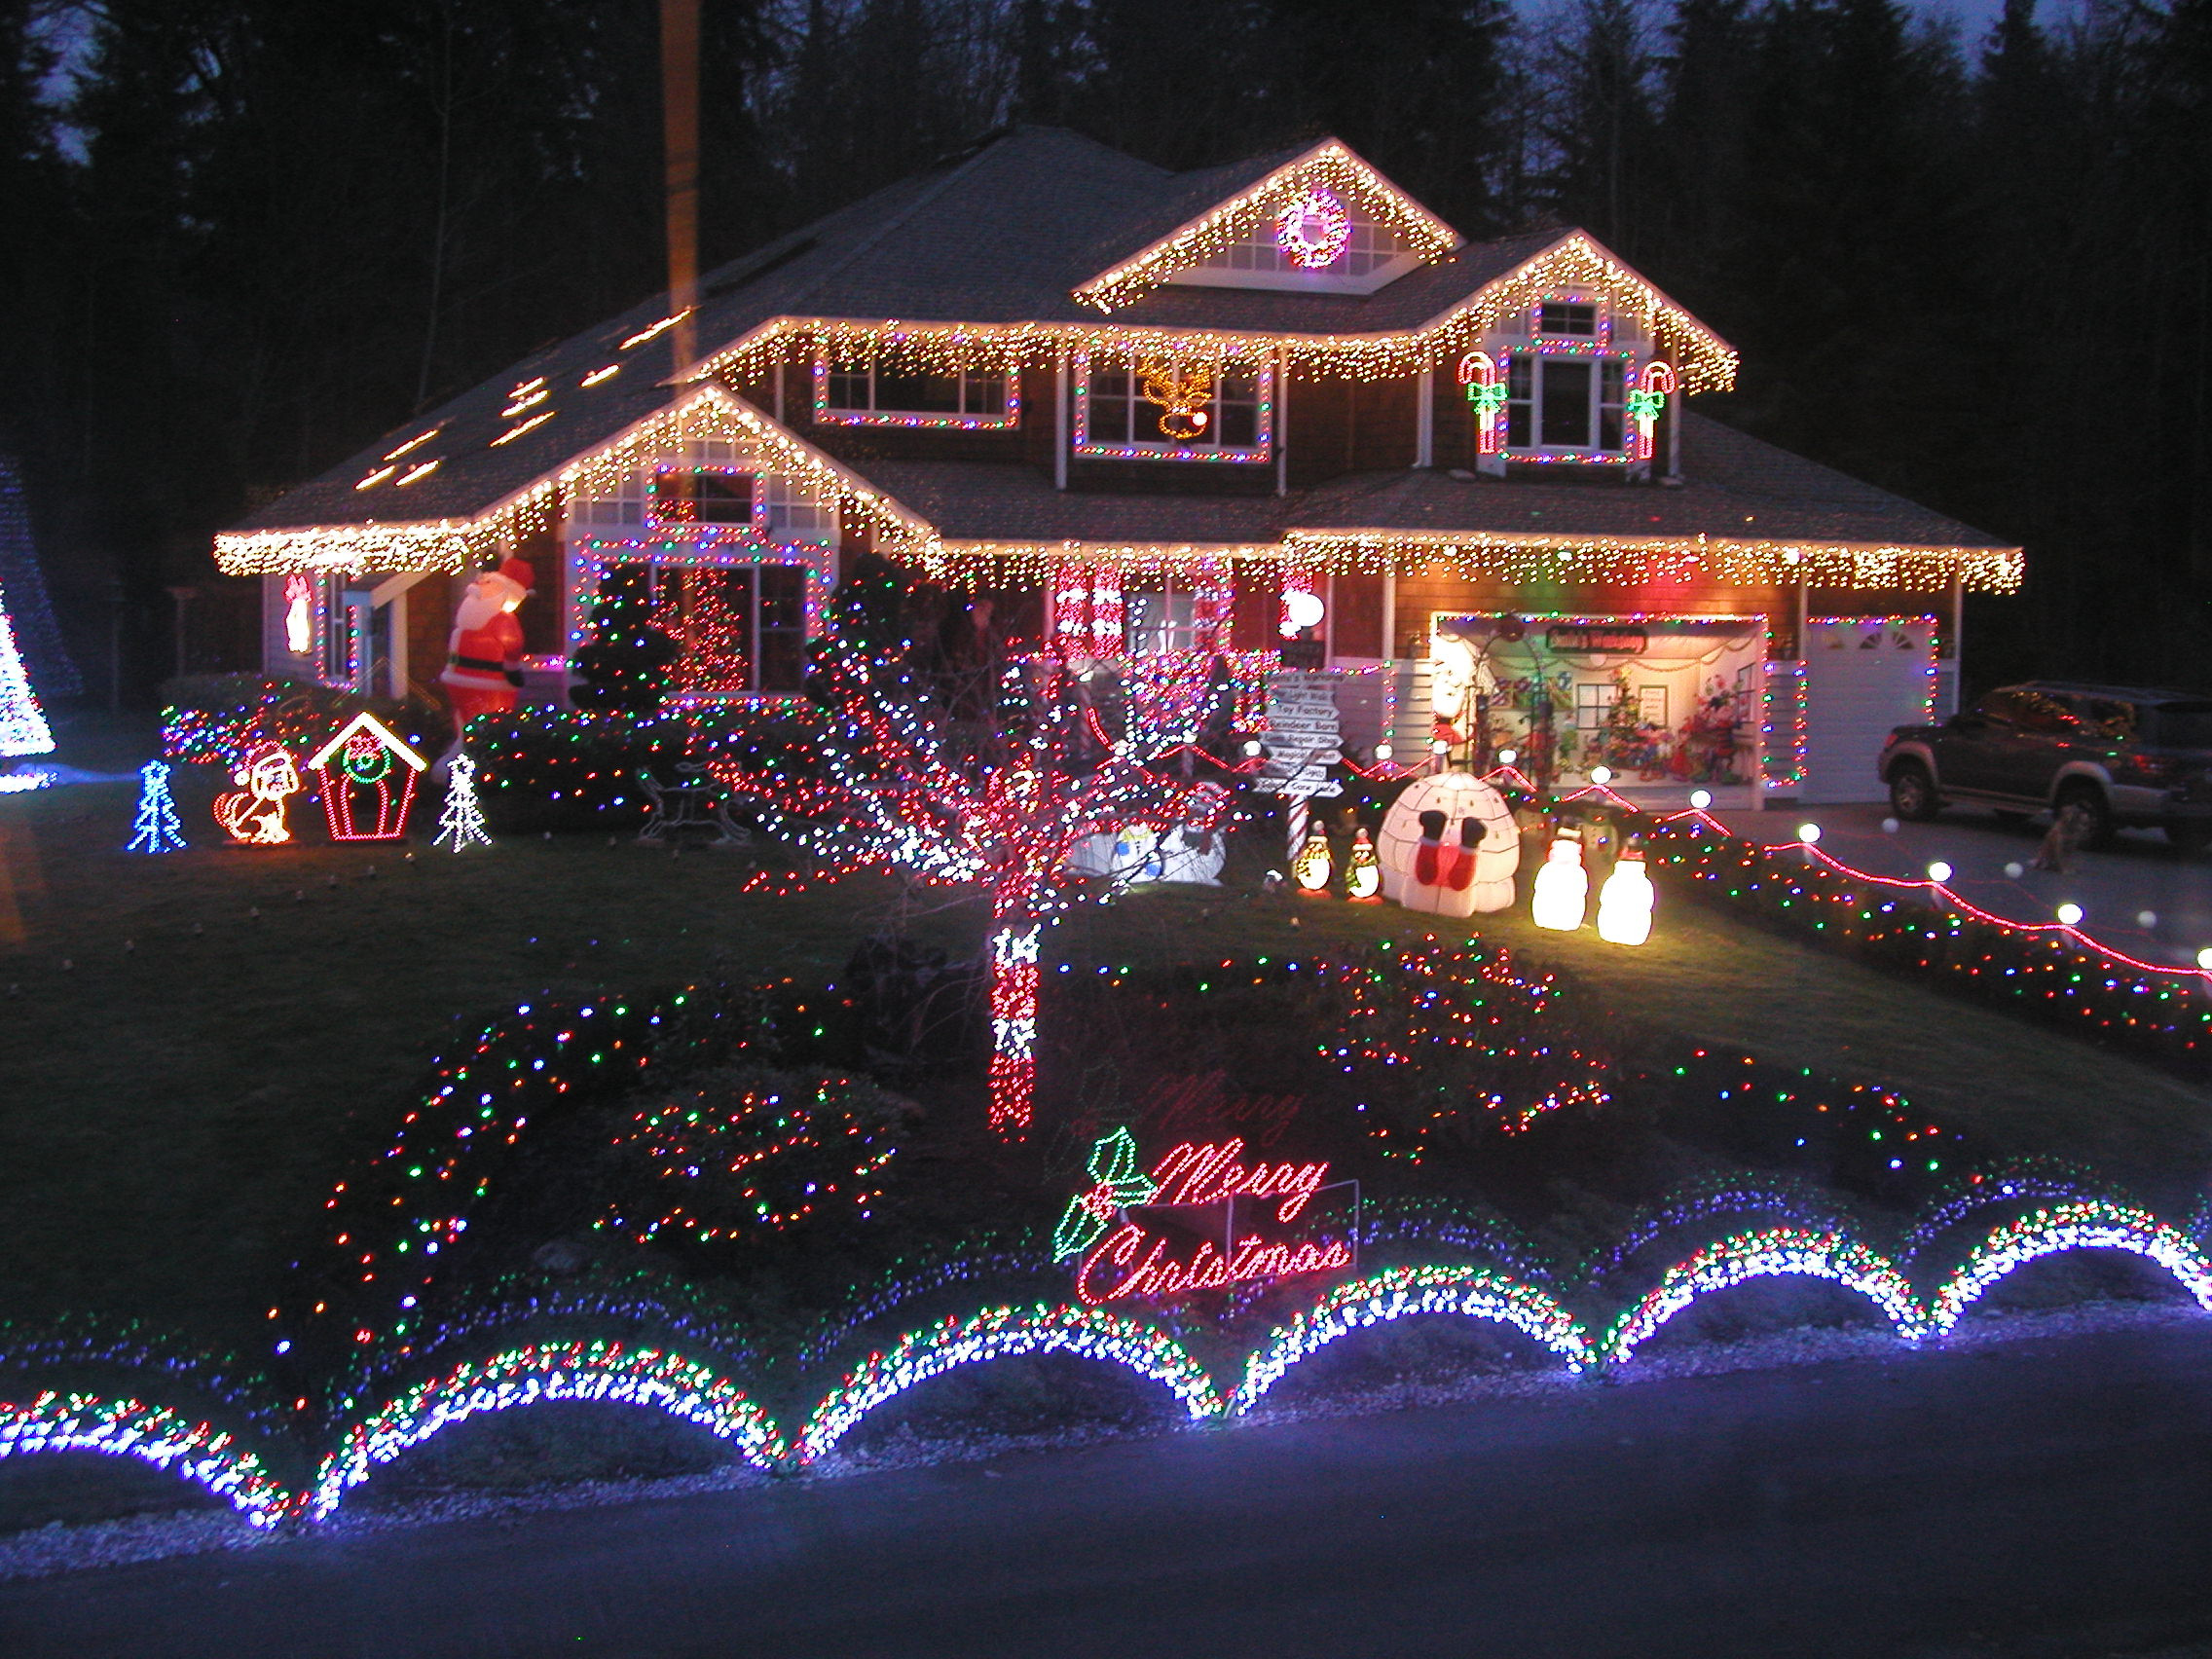 The 30 Best Ideas for Outdoor Christmas Displays  Home Inspiration and